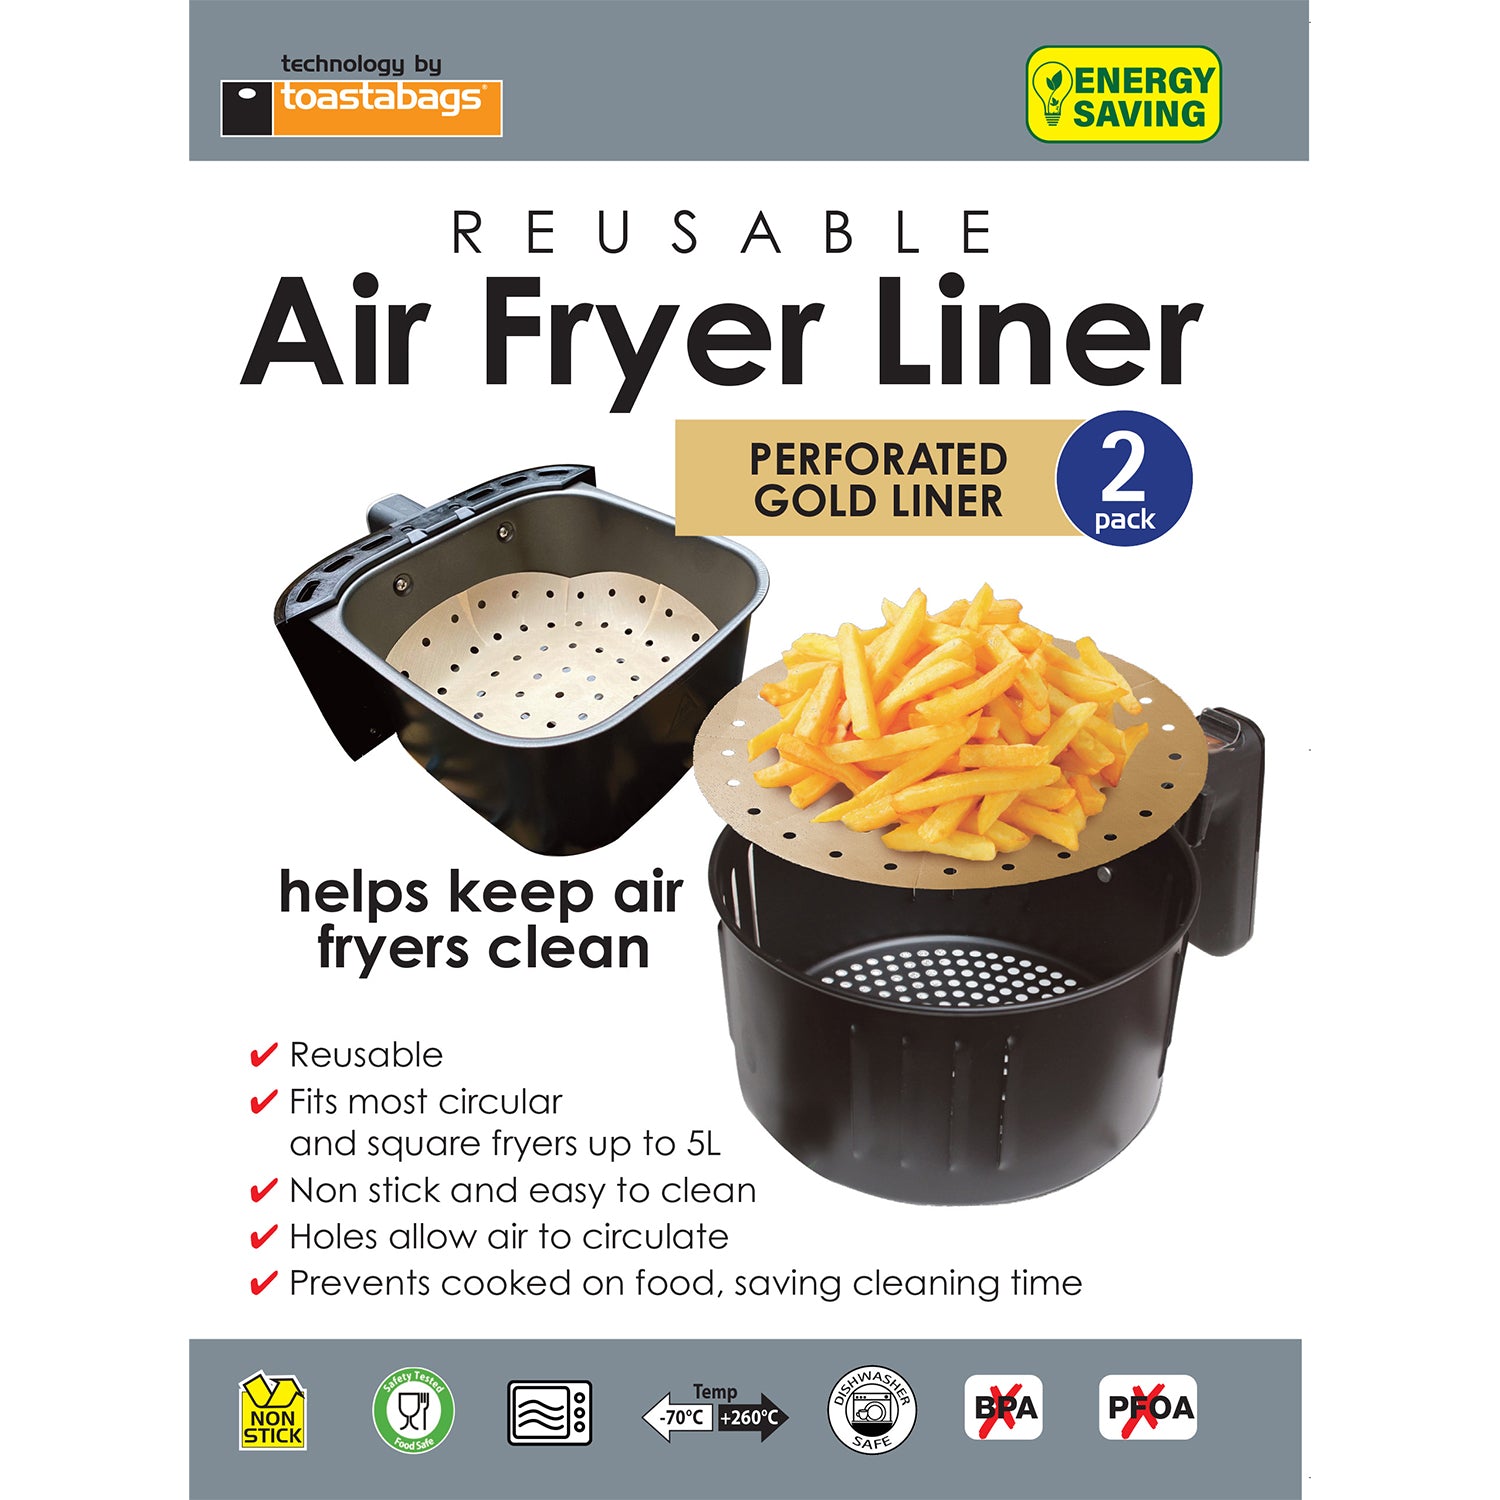 Air Fryer Liner, Gold, Perforated, 2L-5L – planitproducts